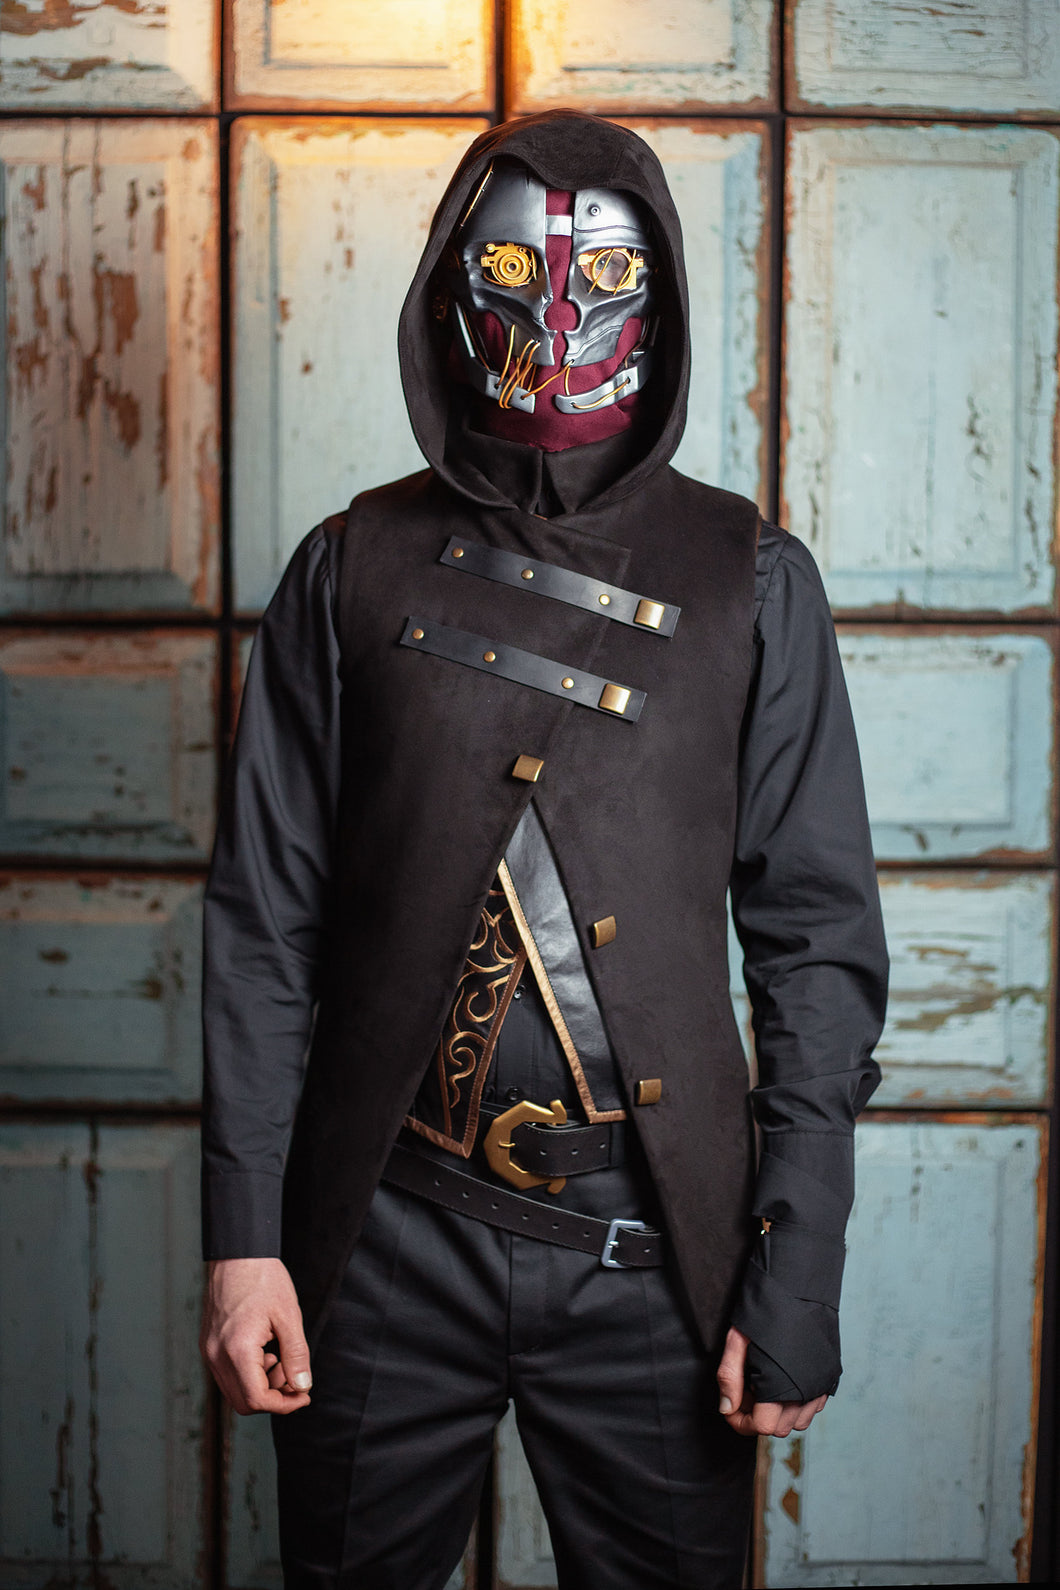 Dishonored 2 Corvo Attano cosplay costume Dishonoured Pc Game series steampunk outfit Halloween costume